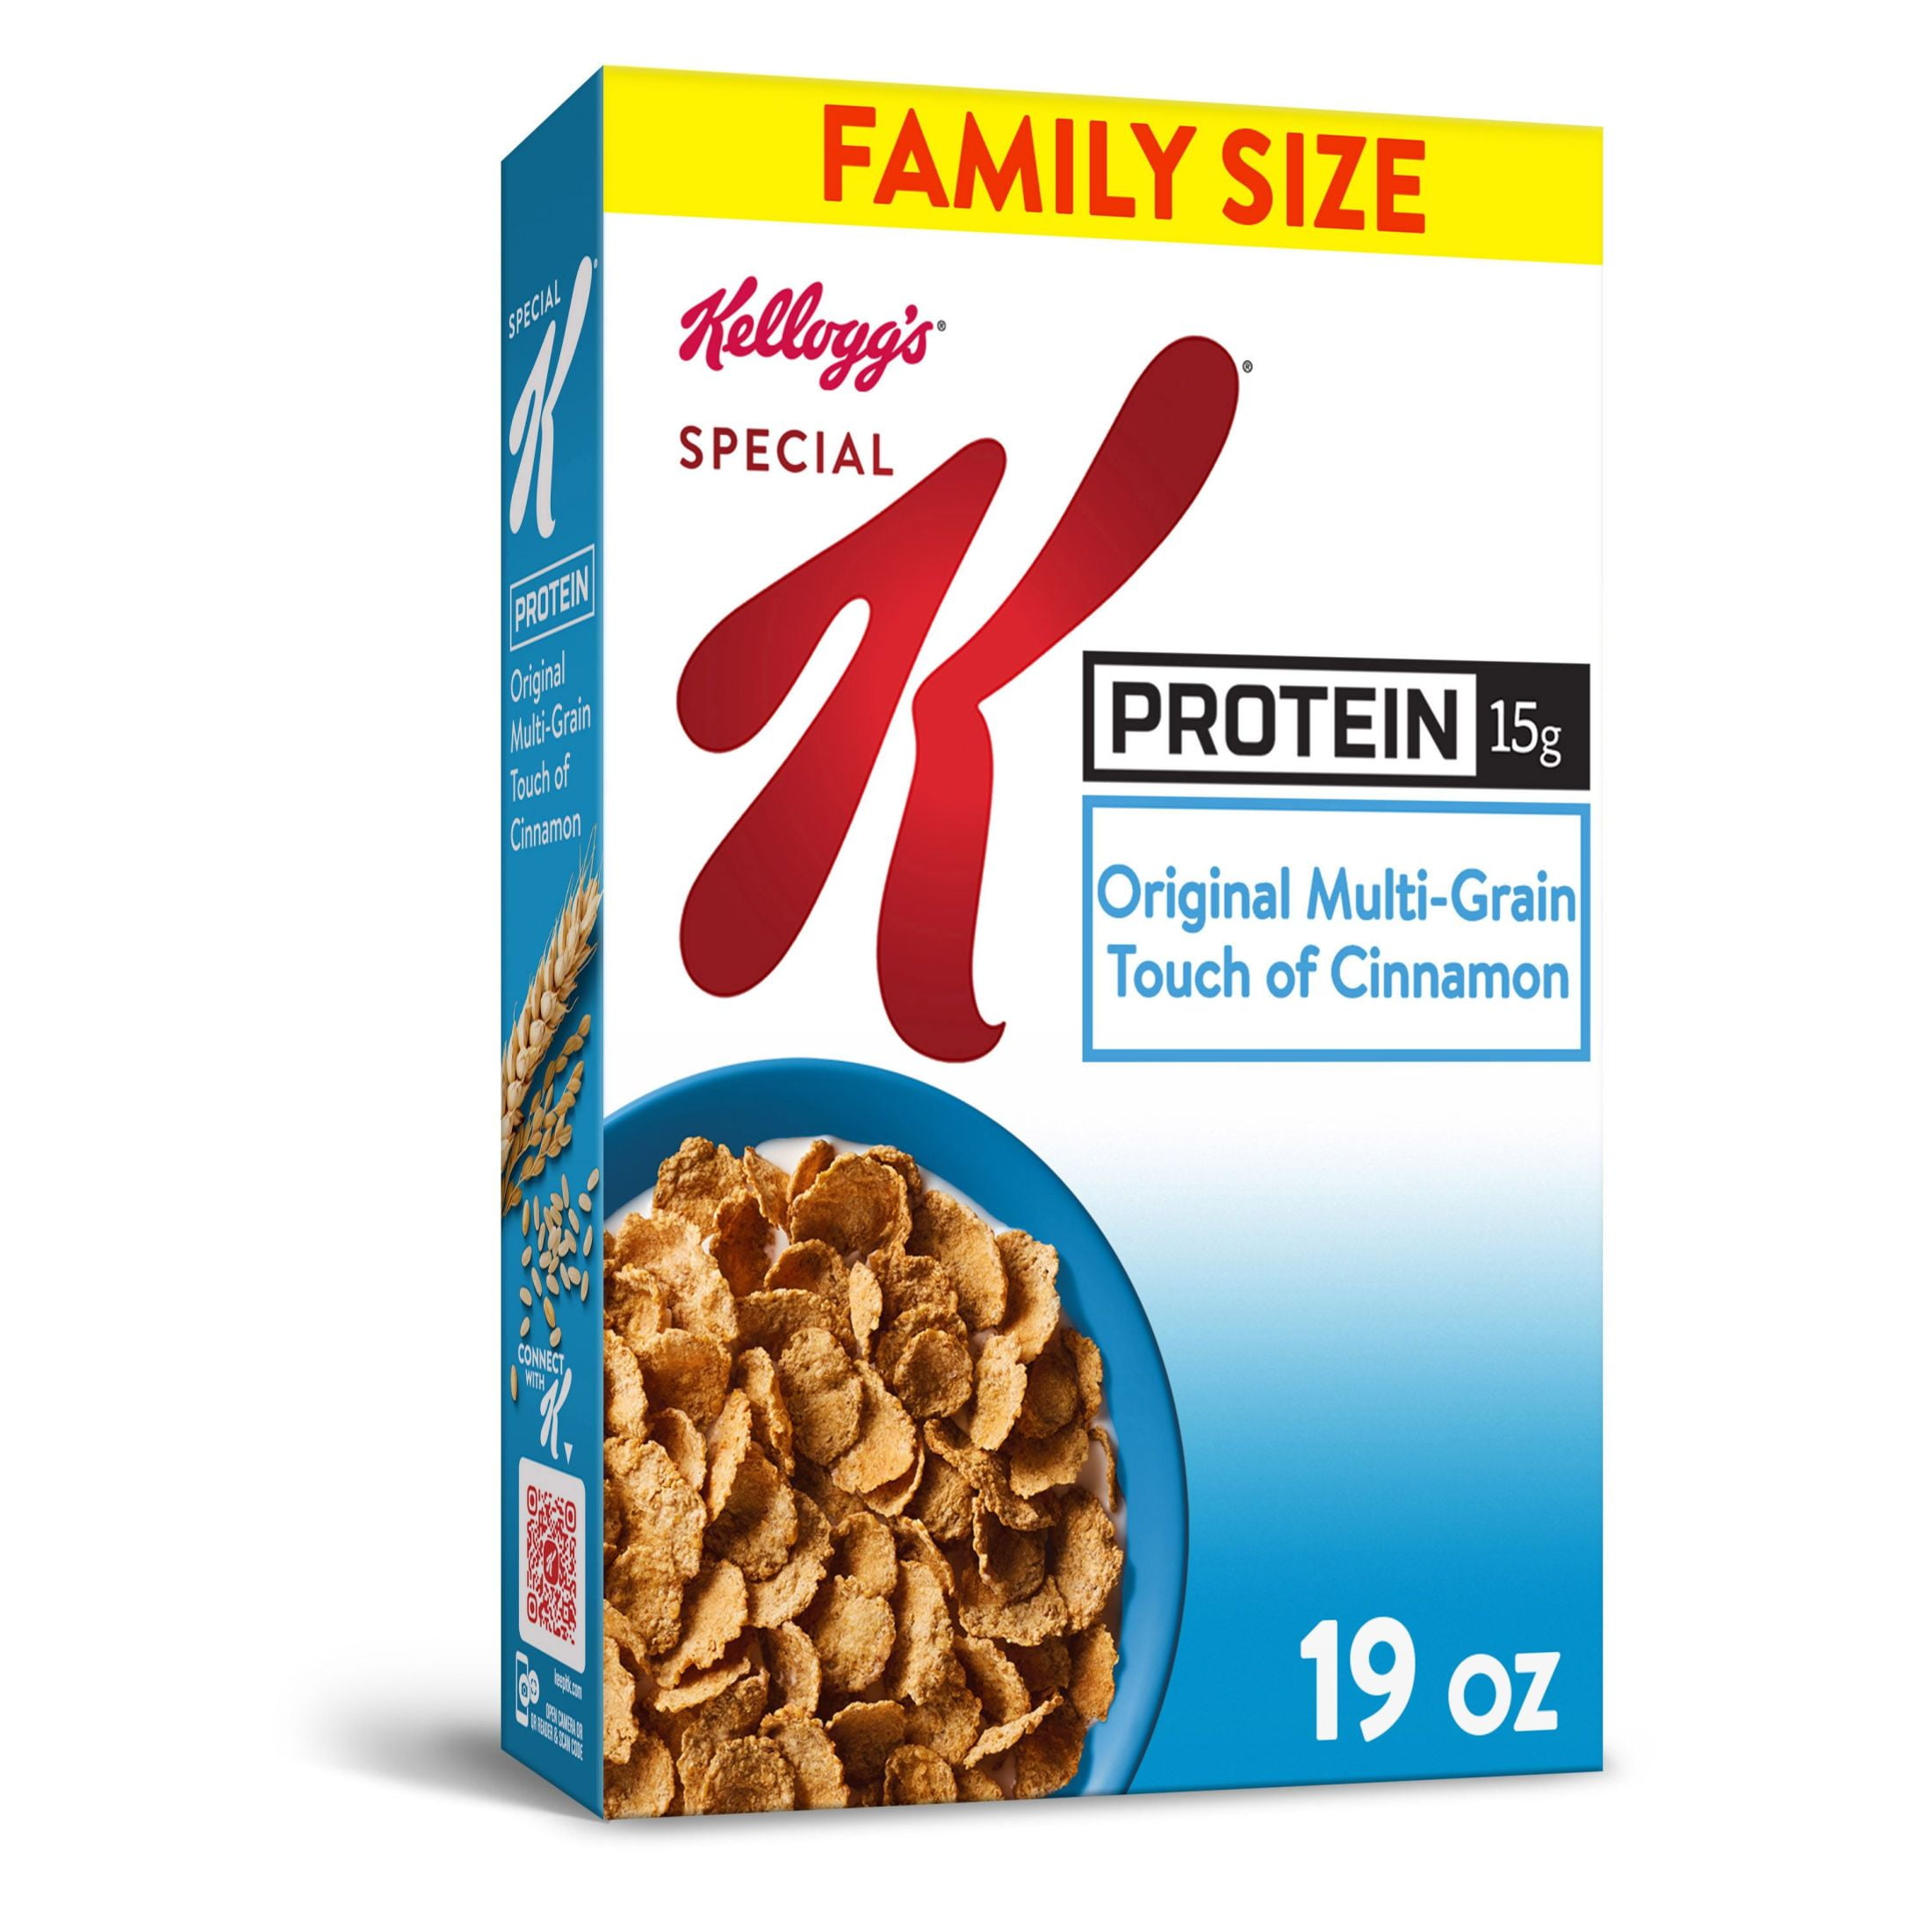 Kellogg's Special K brand launches three new products